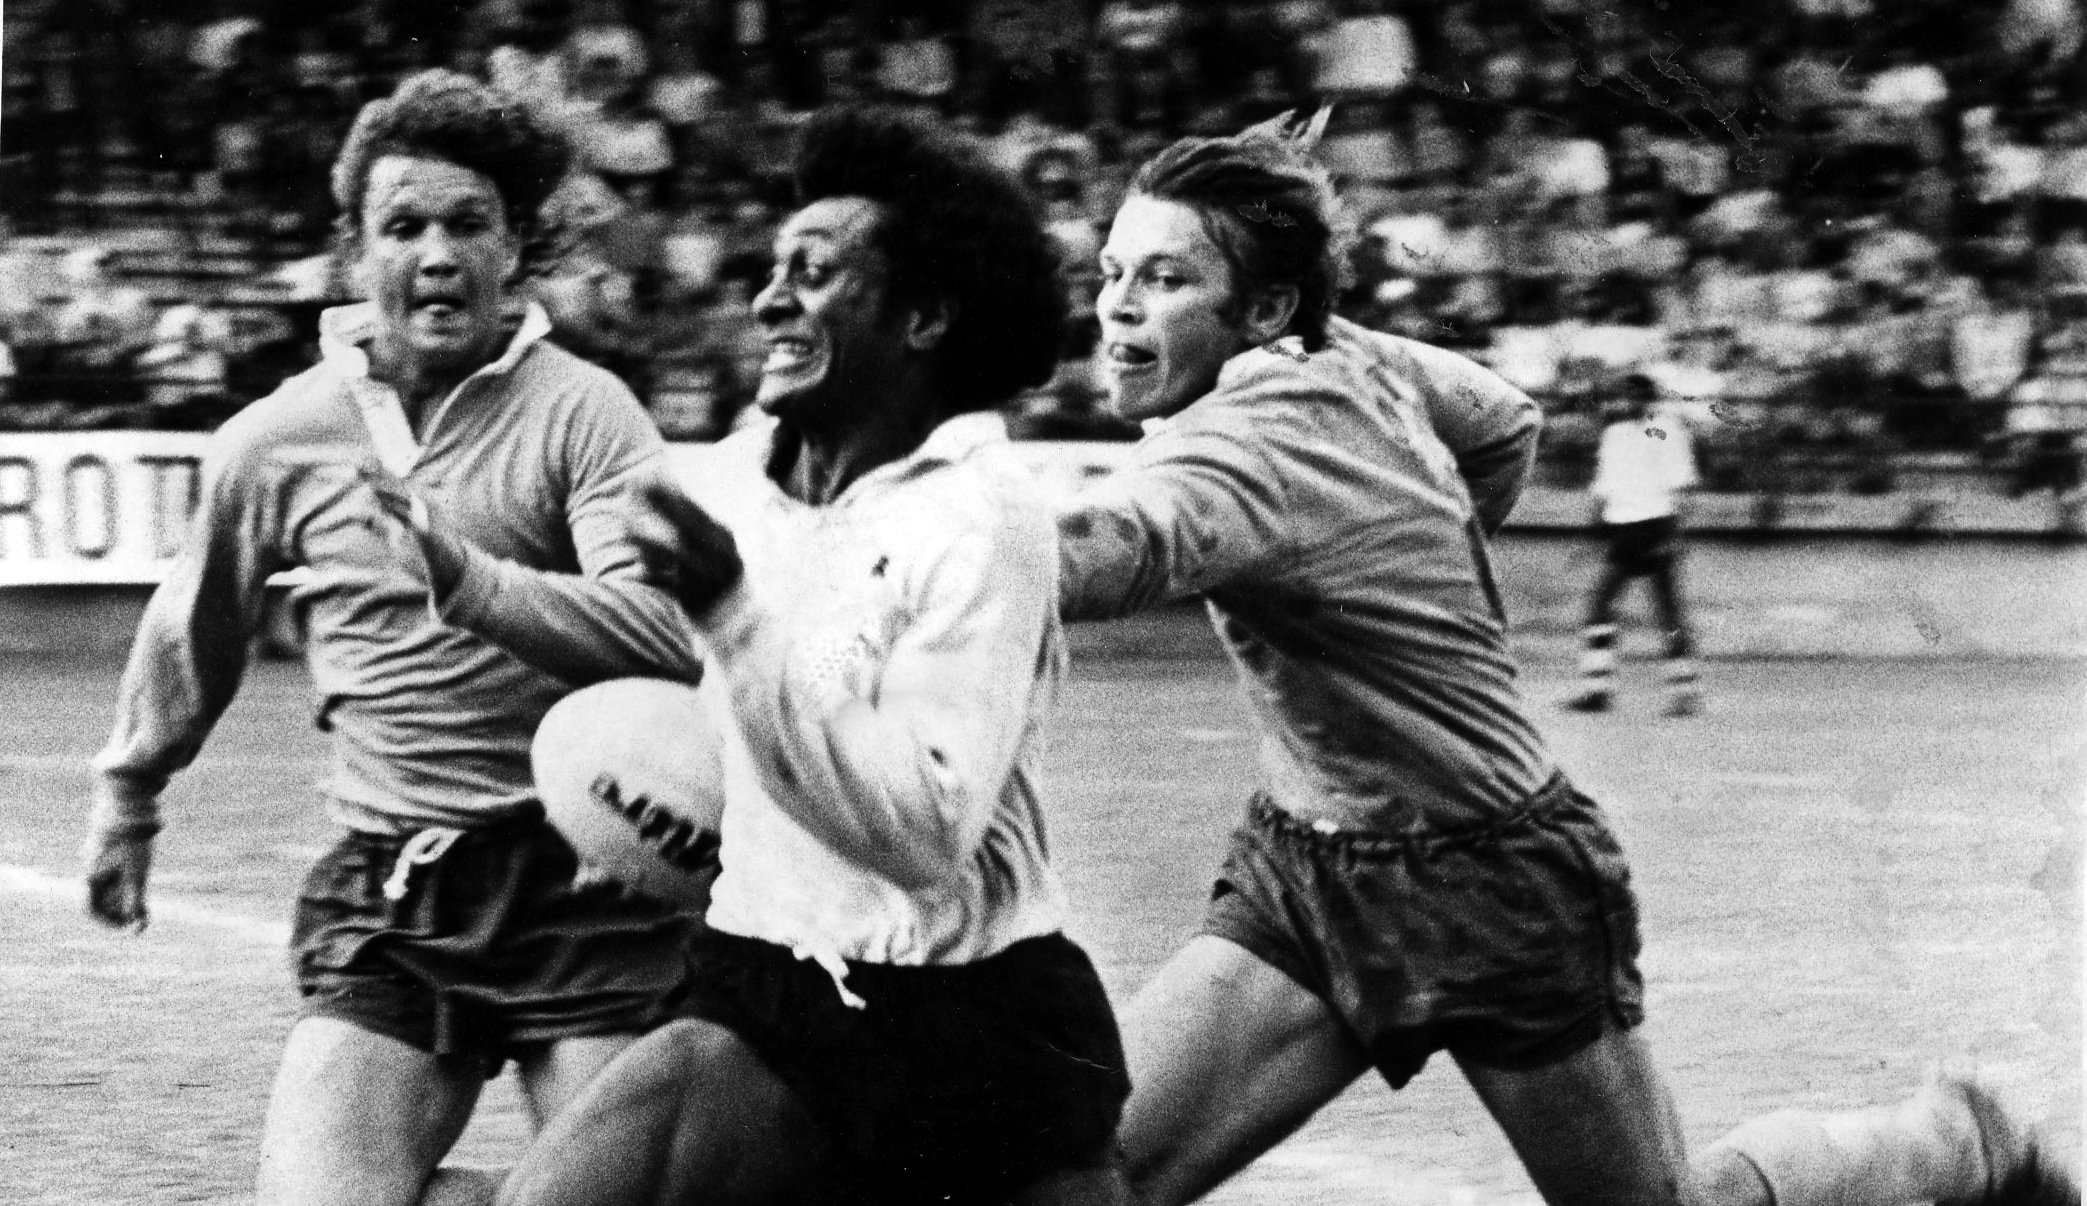 PHOTO 1: March 28, 1976 - Fijian winger Seremaia Tui Cavuilati heads for the line pursued by Gary Thomas (left) and Stephen Streeter in the semi-final against the Wallaroos of Australia. 